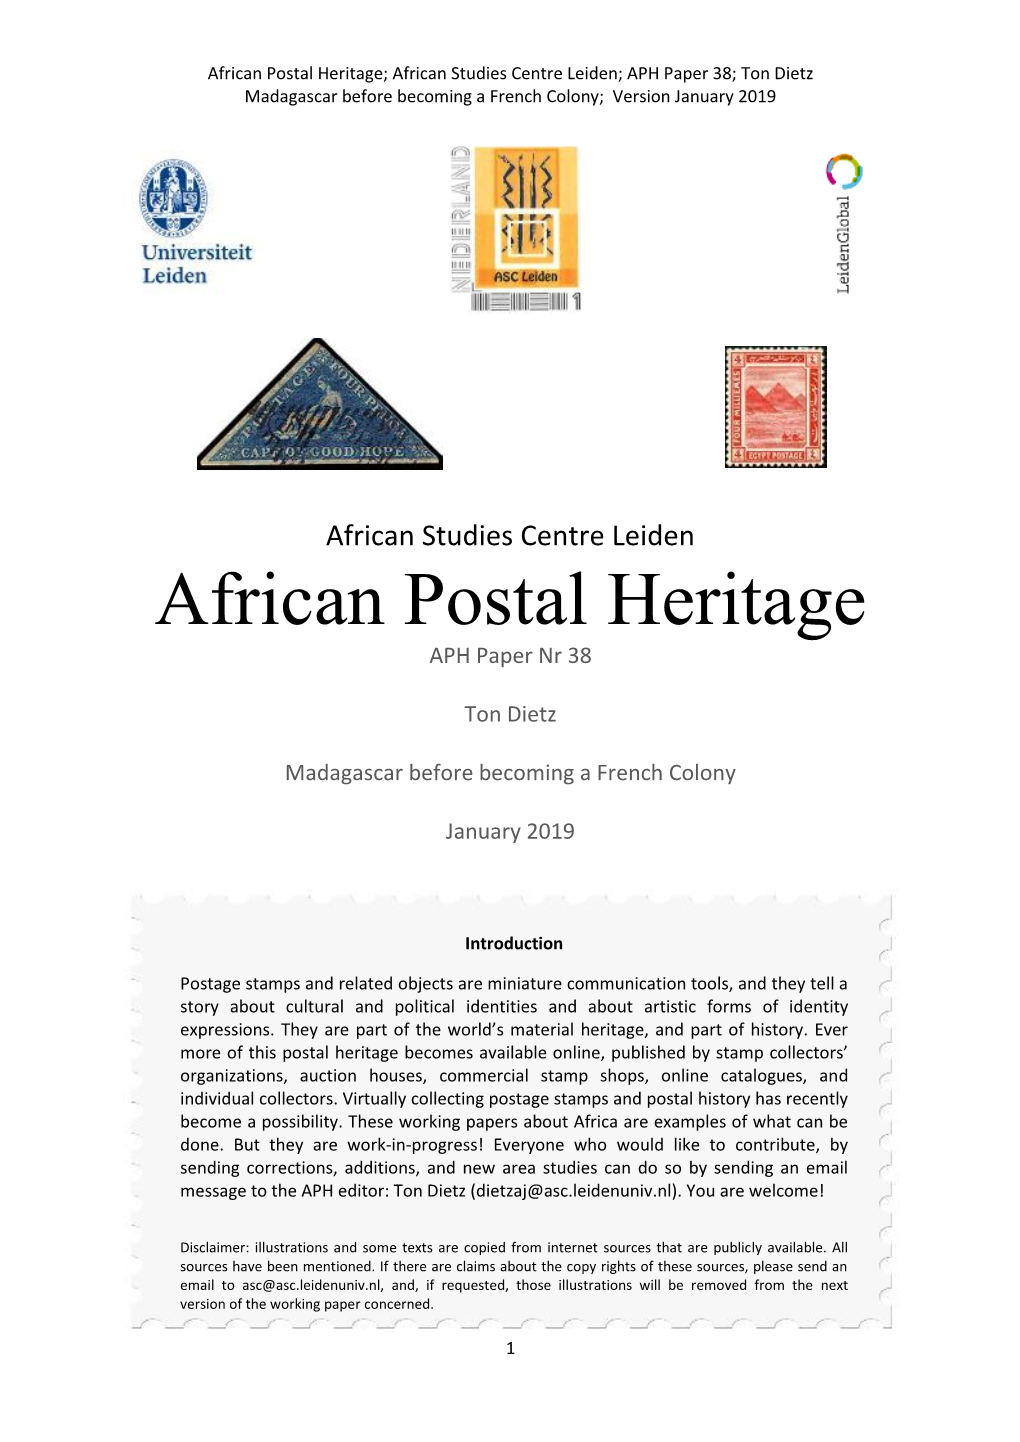 African Postal Heritage; African Studies Centre Leiden; APH Paper 38; Ton Dietz Madagascar Before Becoming a French Colony; Version January 2019